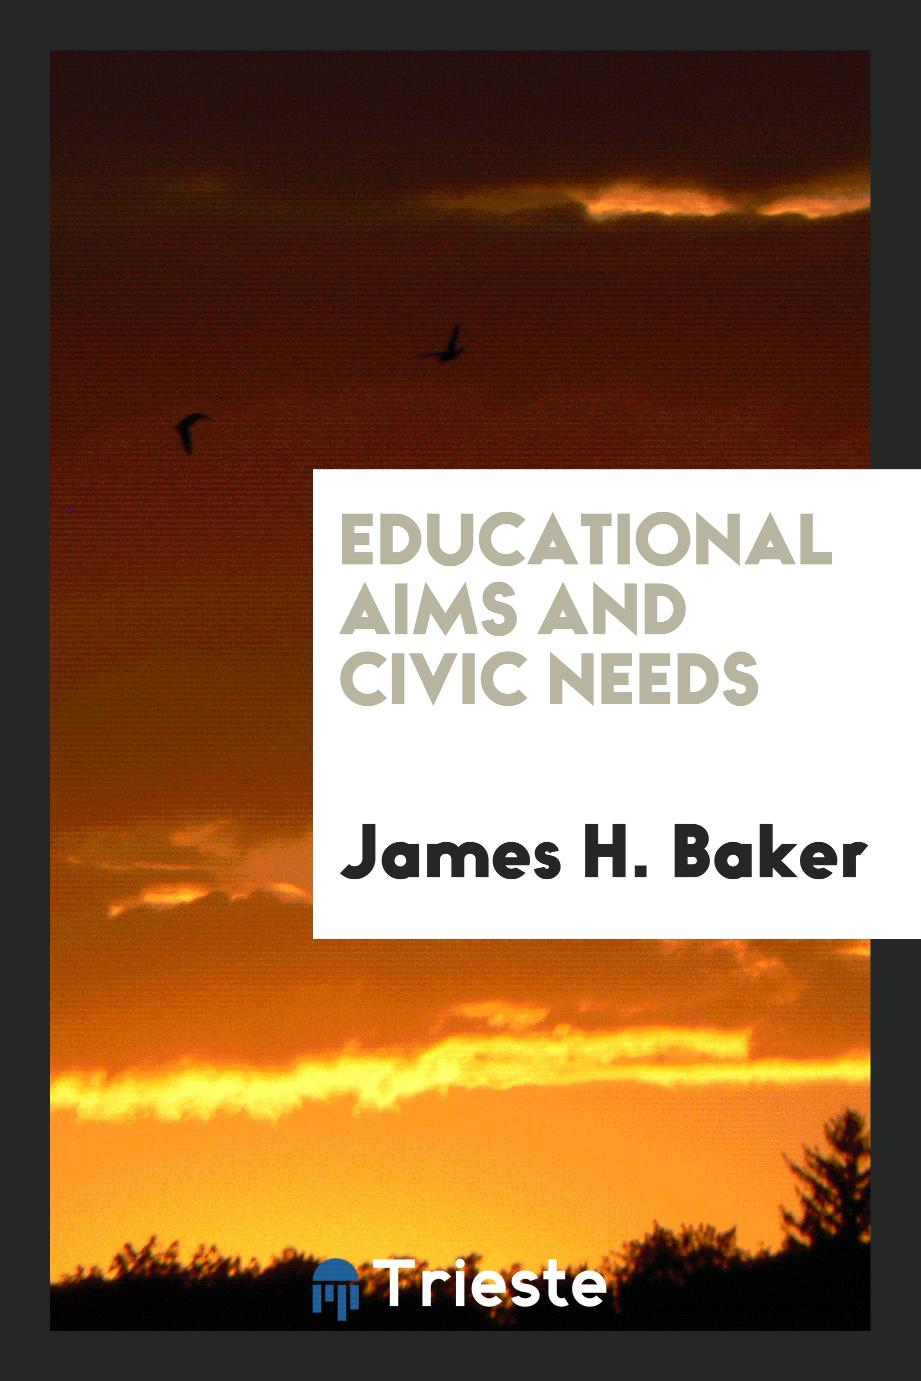 Educational aims and civic needs